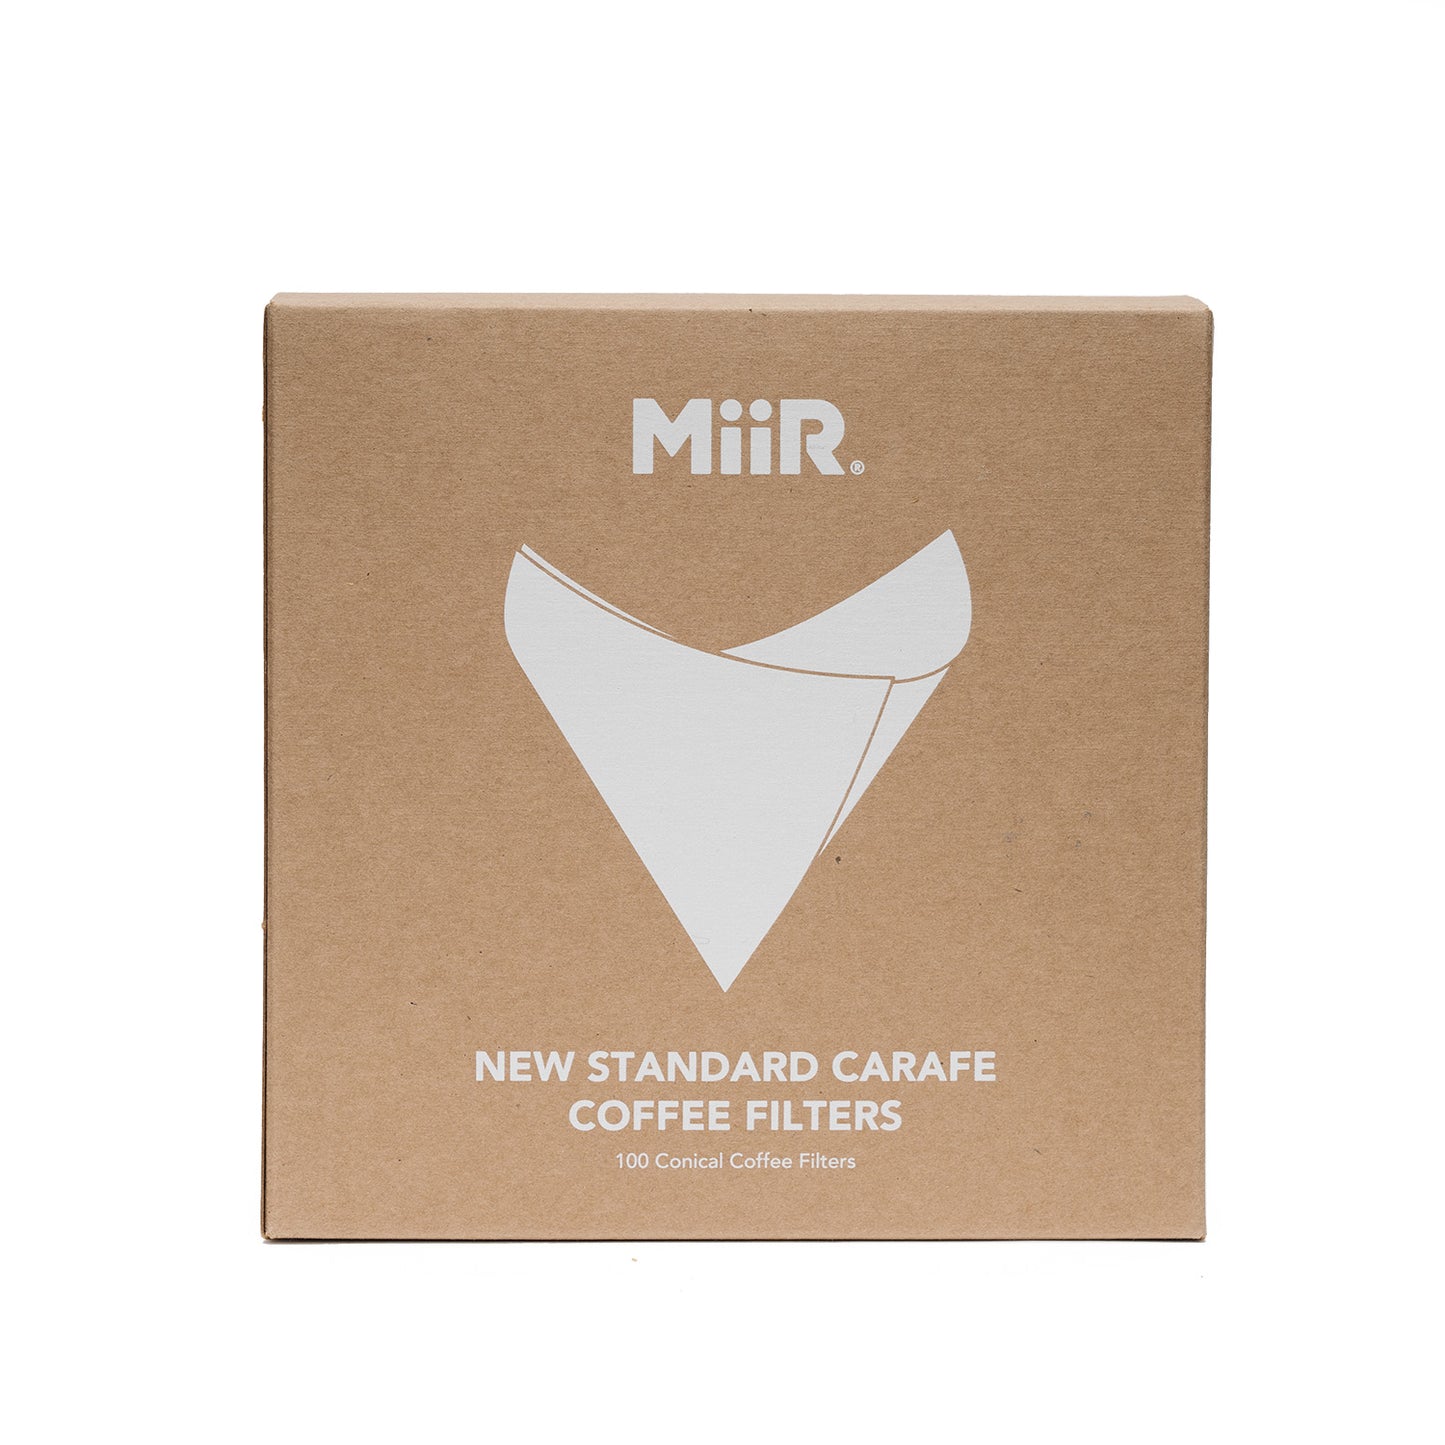 New Standard Carafe Coffee Filters